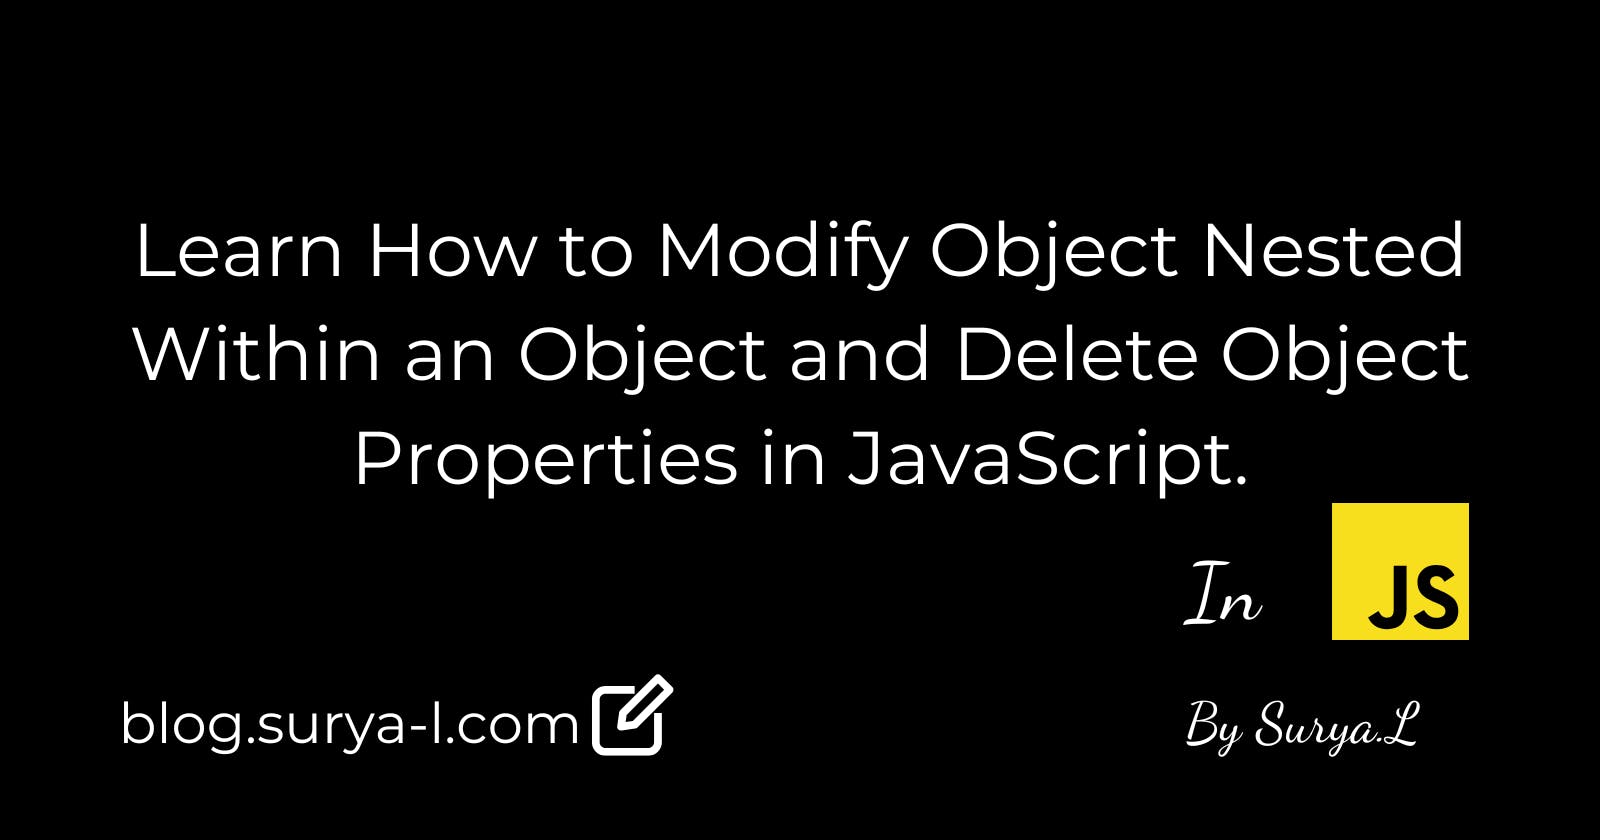 Learn How to Modify Object Nested Within an Object and Delete Object Properties in JavaScript.